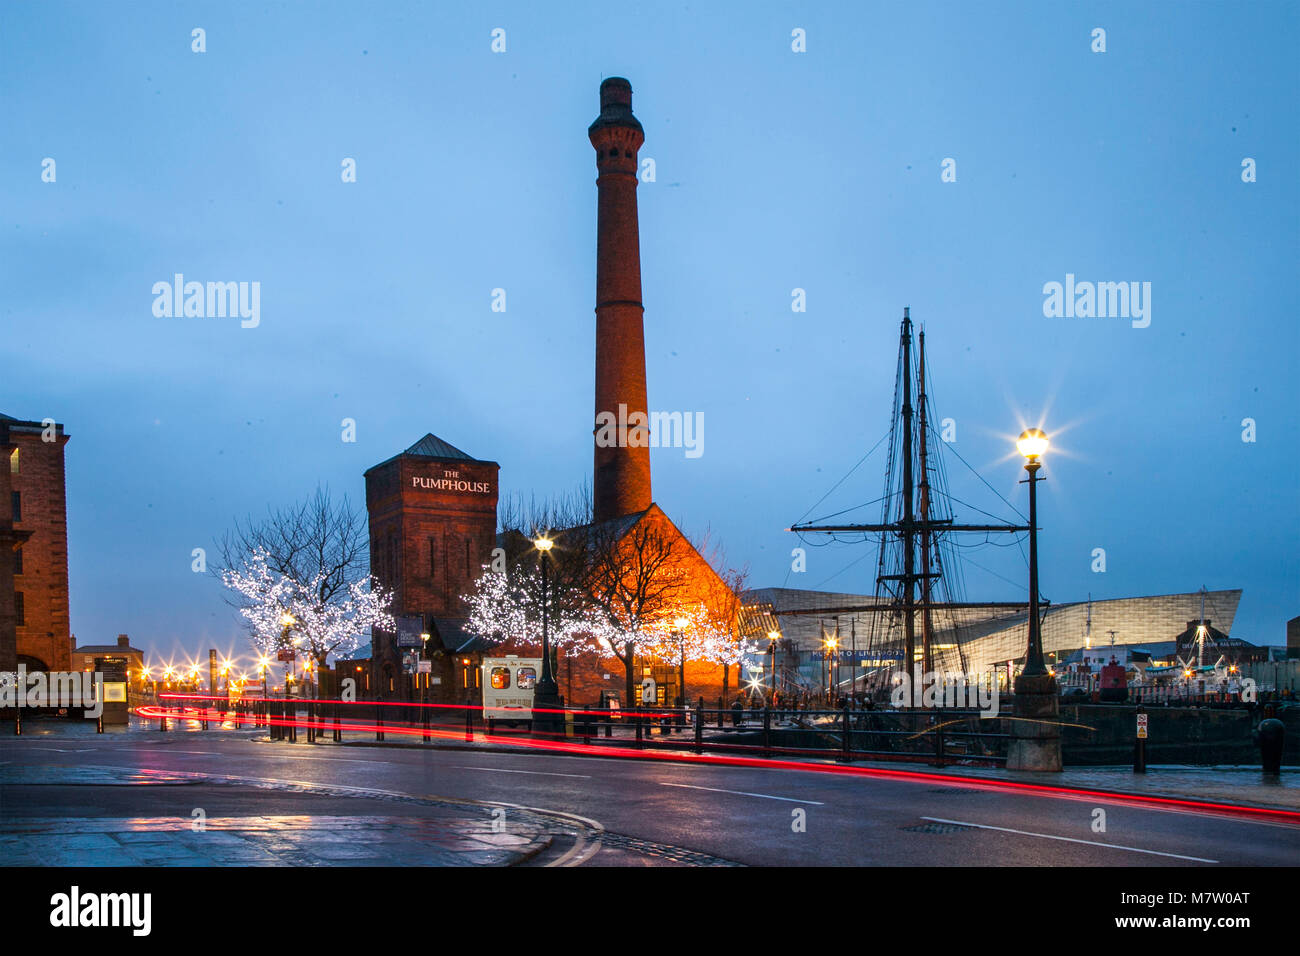 Albert Dock; Liverpool; Merseyside. 13th March 2018. UK Weather; Calm; damp; overcast start to the day. Continuous & persistent rain is expected in the north-west with prospects of brighter conditions later in the day. Credit; MediaWorldImages/AlamyLiveNews. Stock Photo